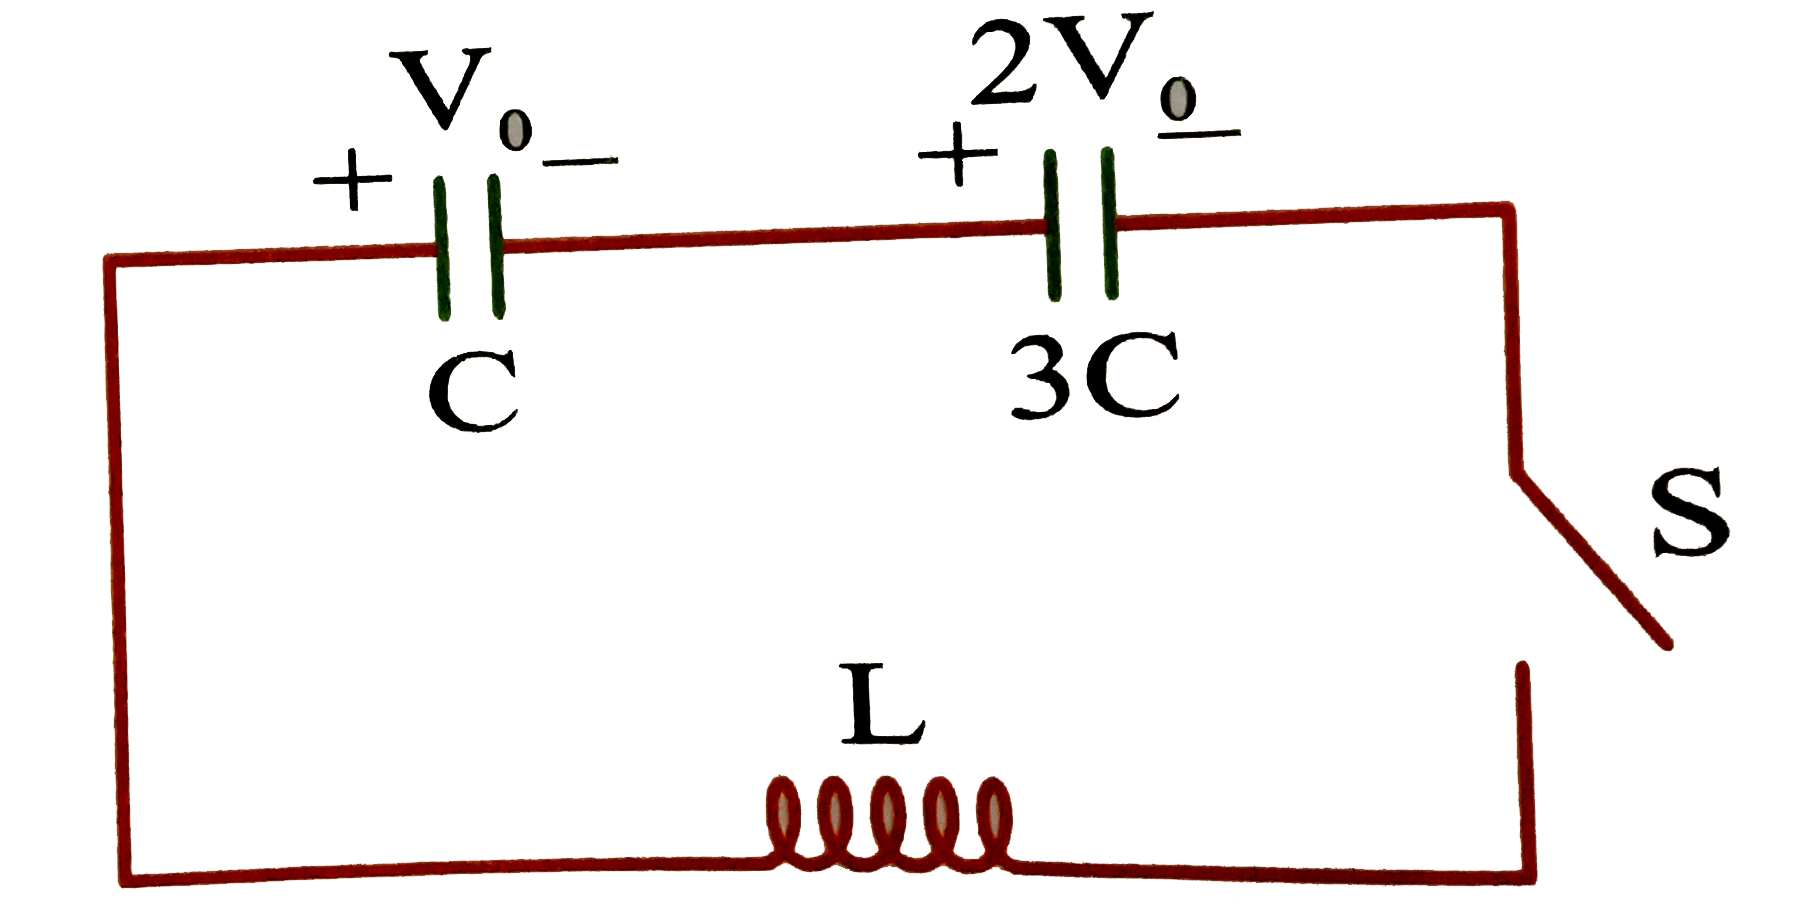 Two capacitors of capacitance C and 3C are charged to potential difference V(0) and 2V(0) respectively, and connected to an inductor of inductance L as shown in figure. Initially the current in the inductor is zero. Now, the switch S is closed.      The maximum current in the indcutor is :